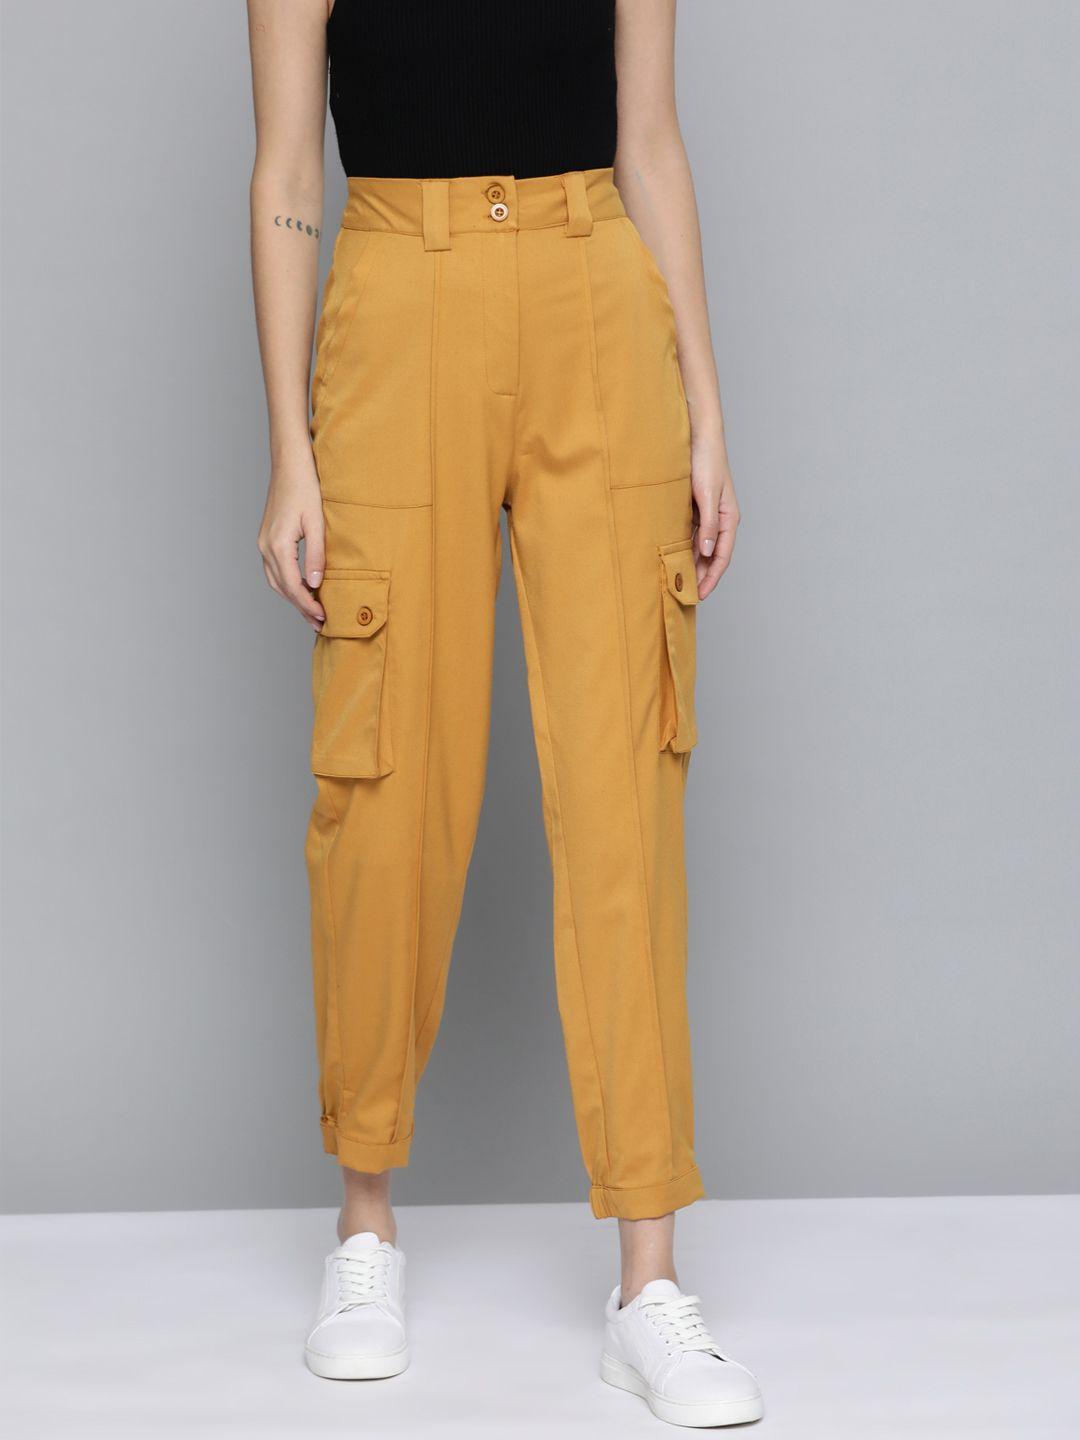 mast-&-harbour-women-mustard-brown-solid-cargos-trousers